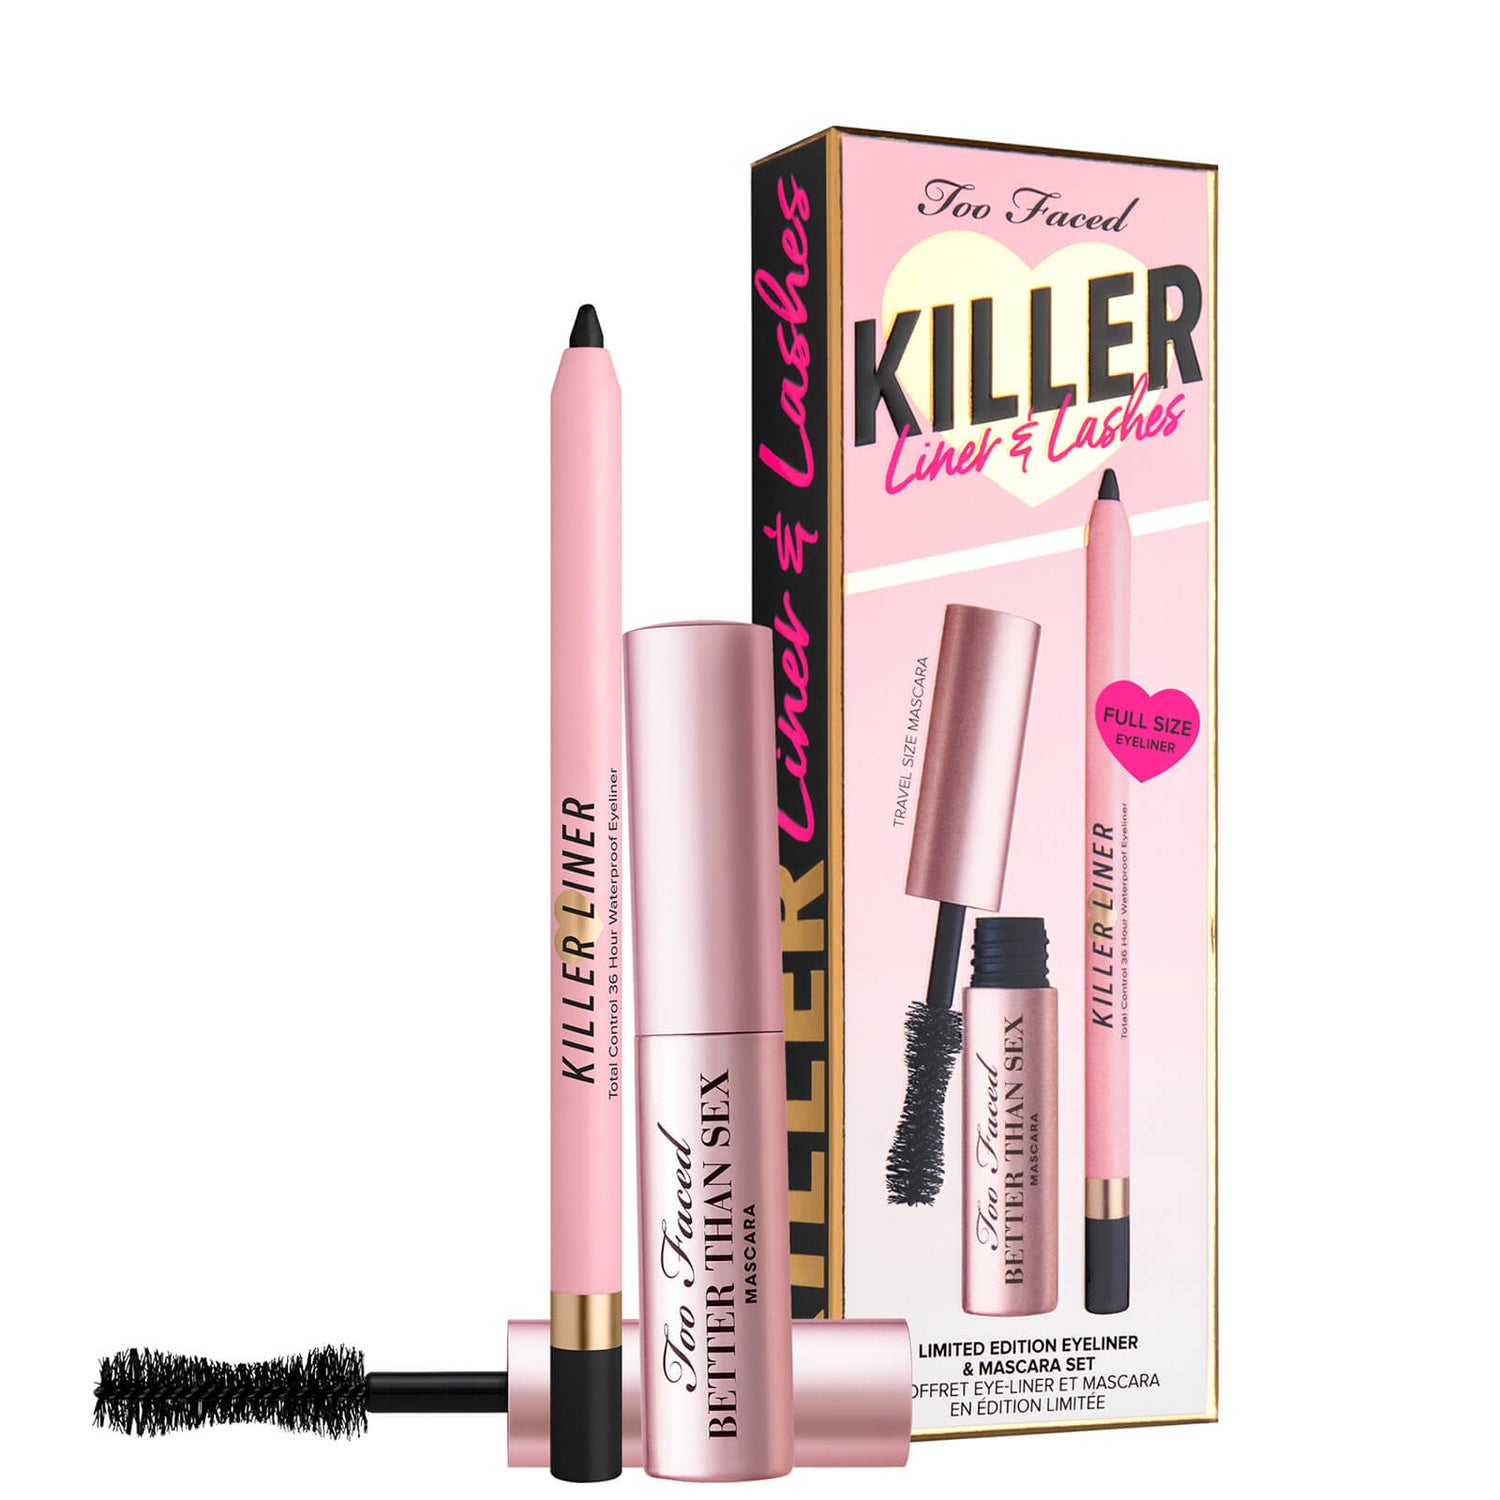 Too Faced Limited Edition Killer Lashes and Liner Mascara και Eyeliner Duo Set (αξίας £28.00)